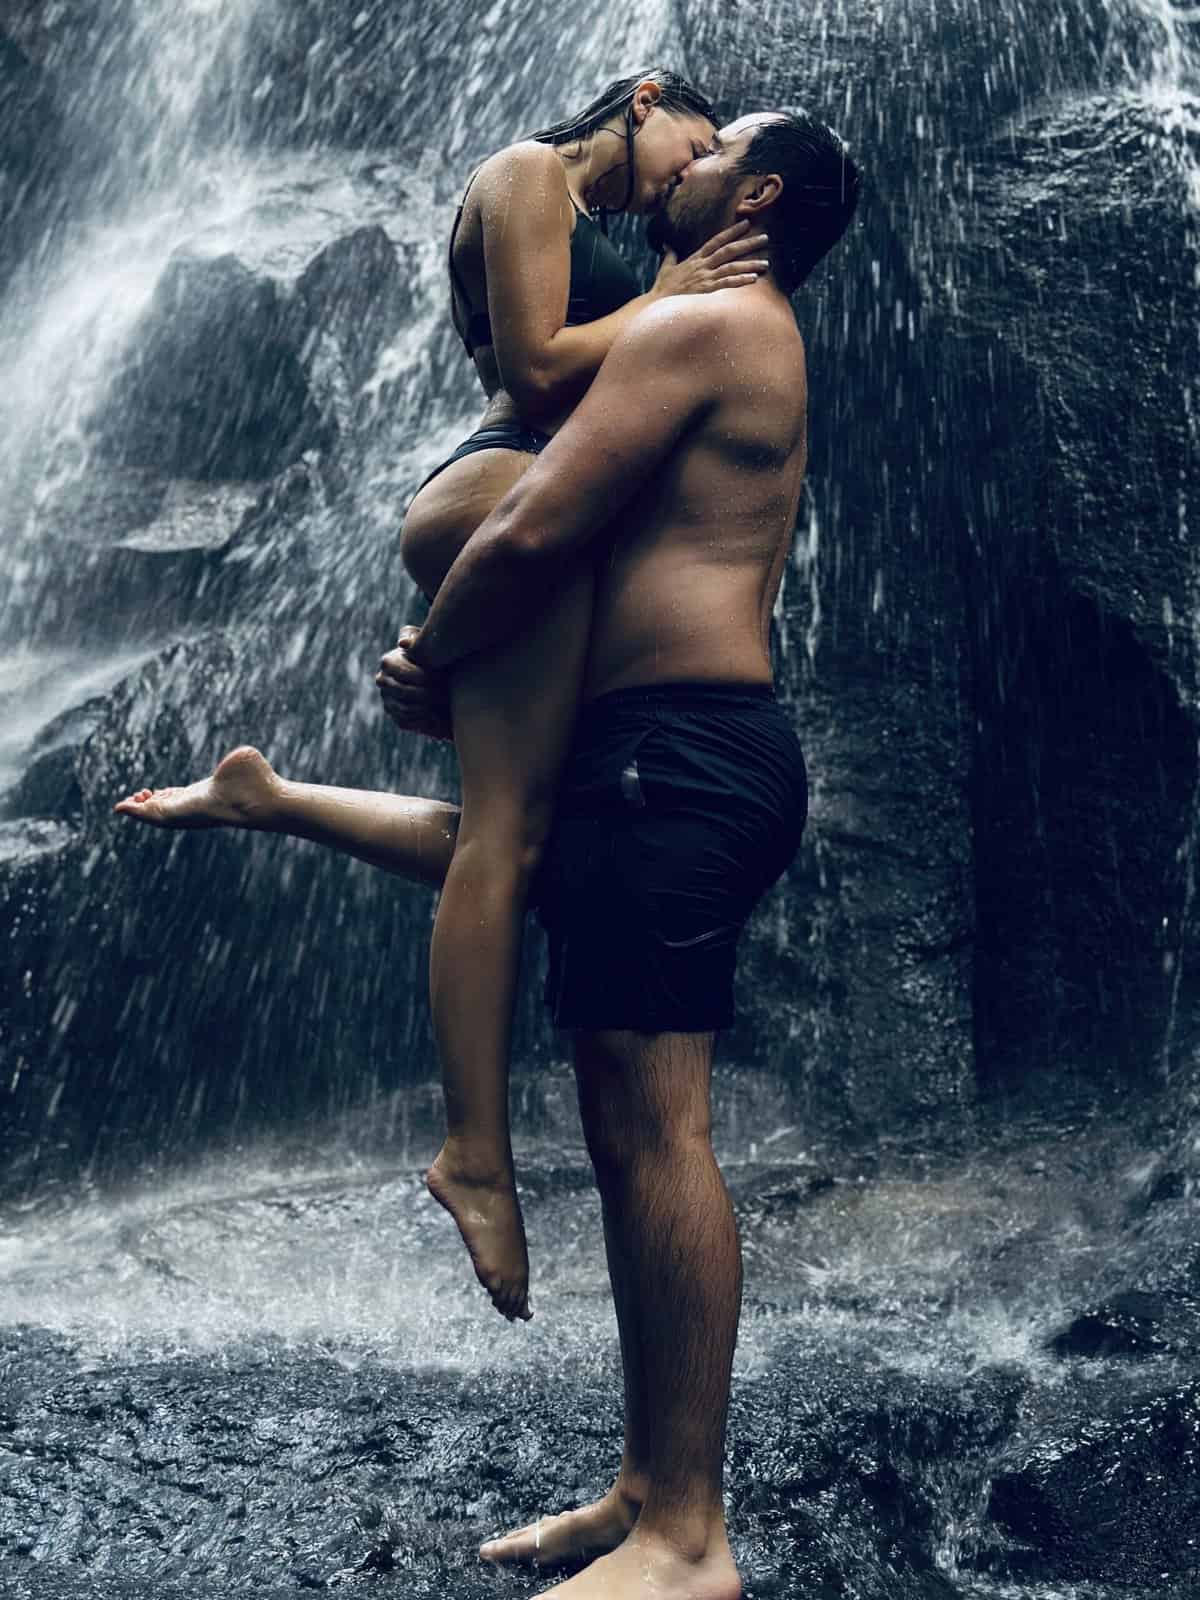 A man and woman kissing in a waterfall. 